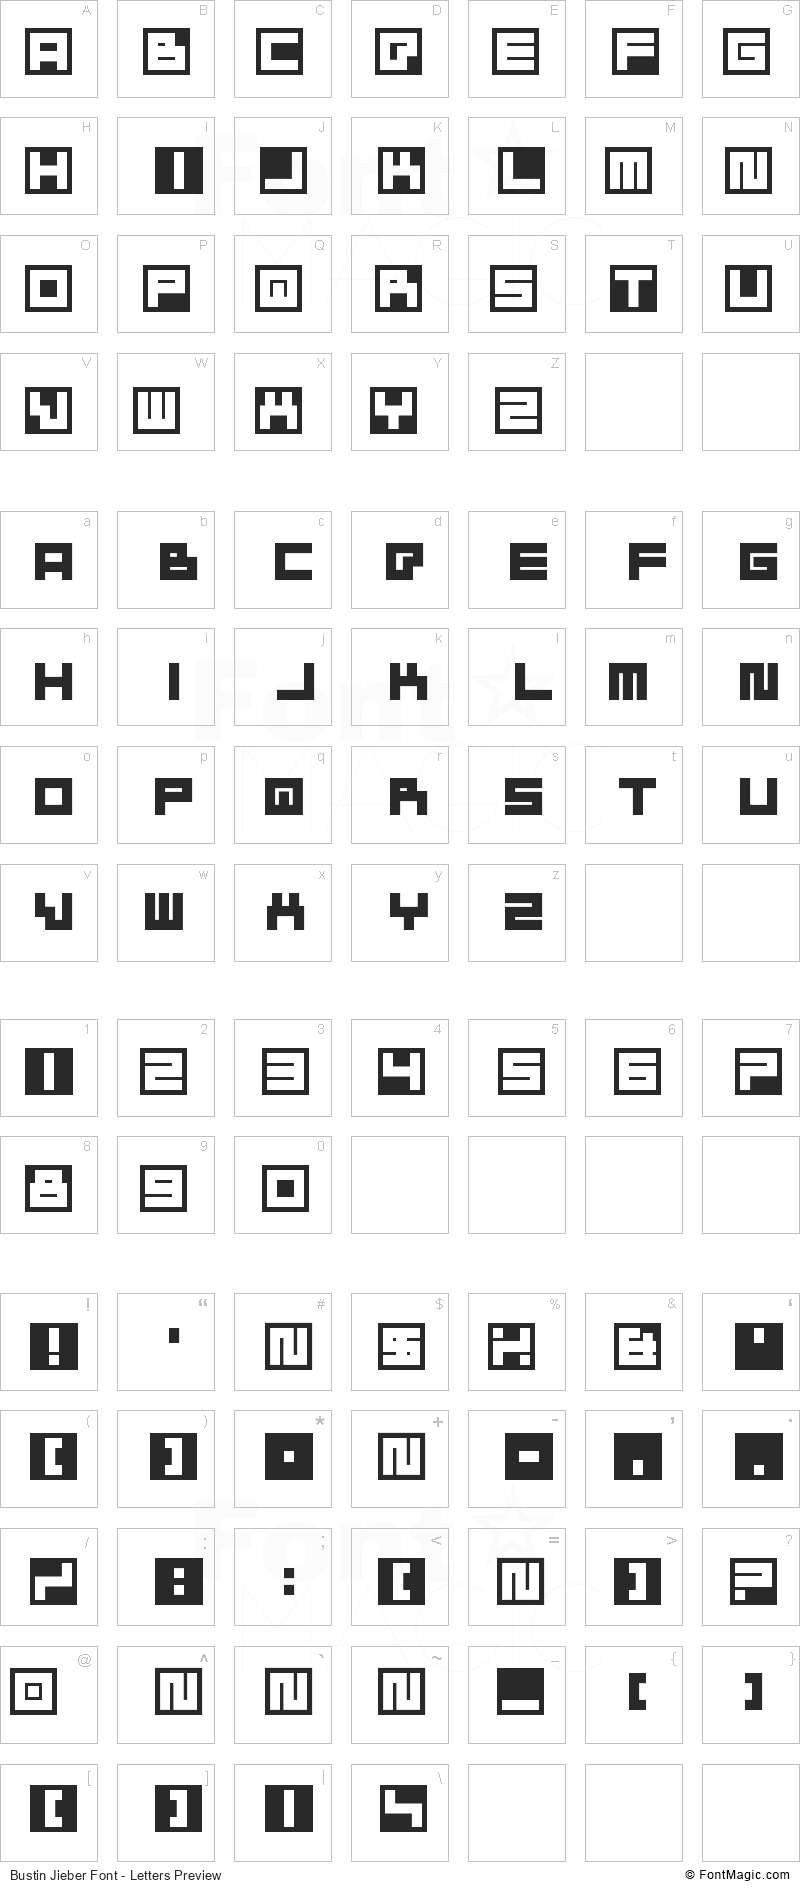 Bustin Jieber Font - All Latters Preview Chart